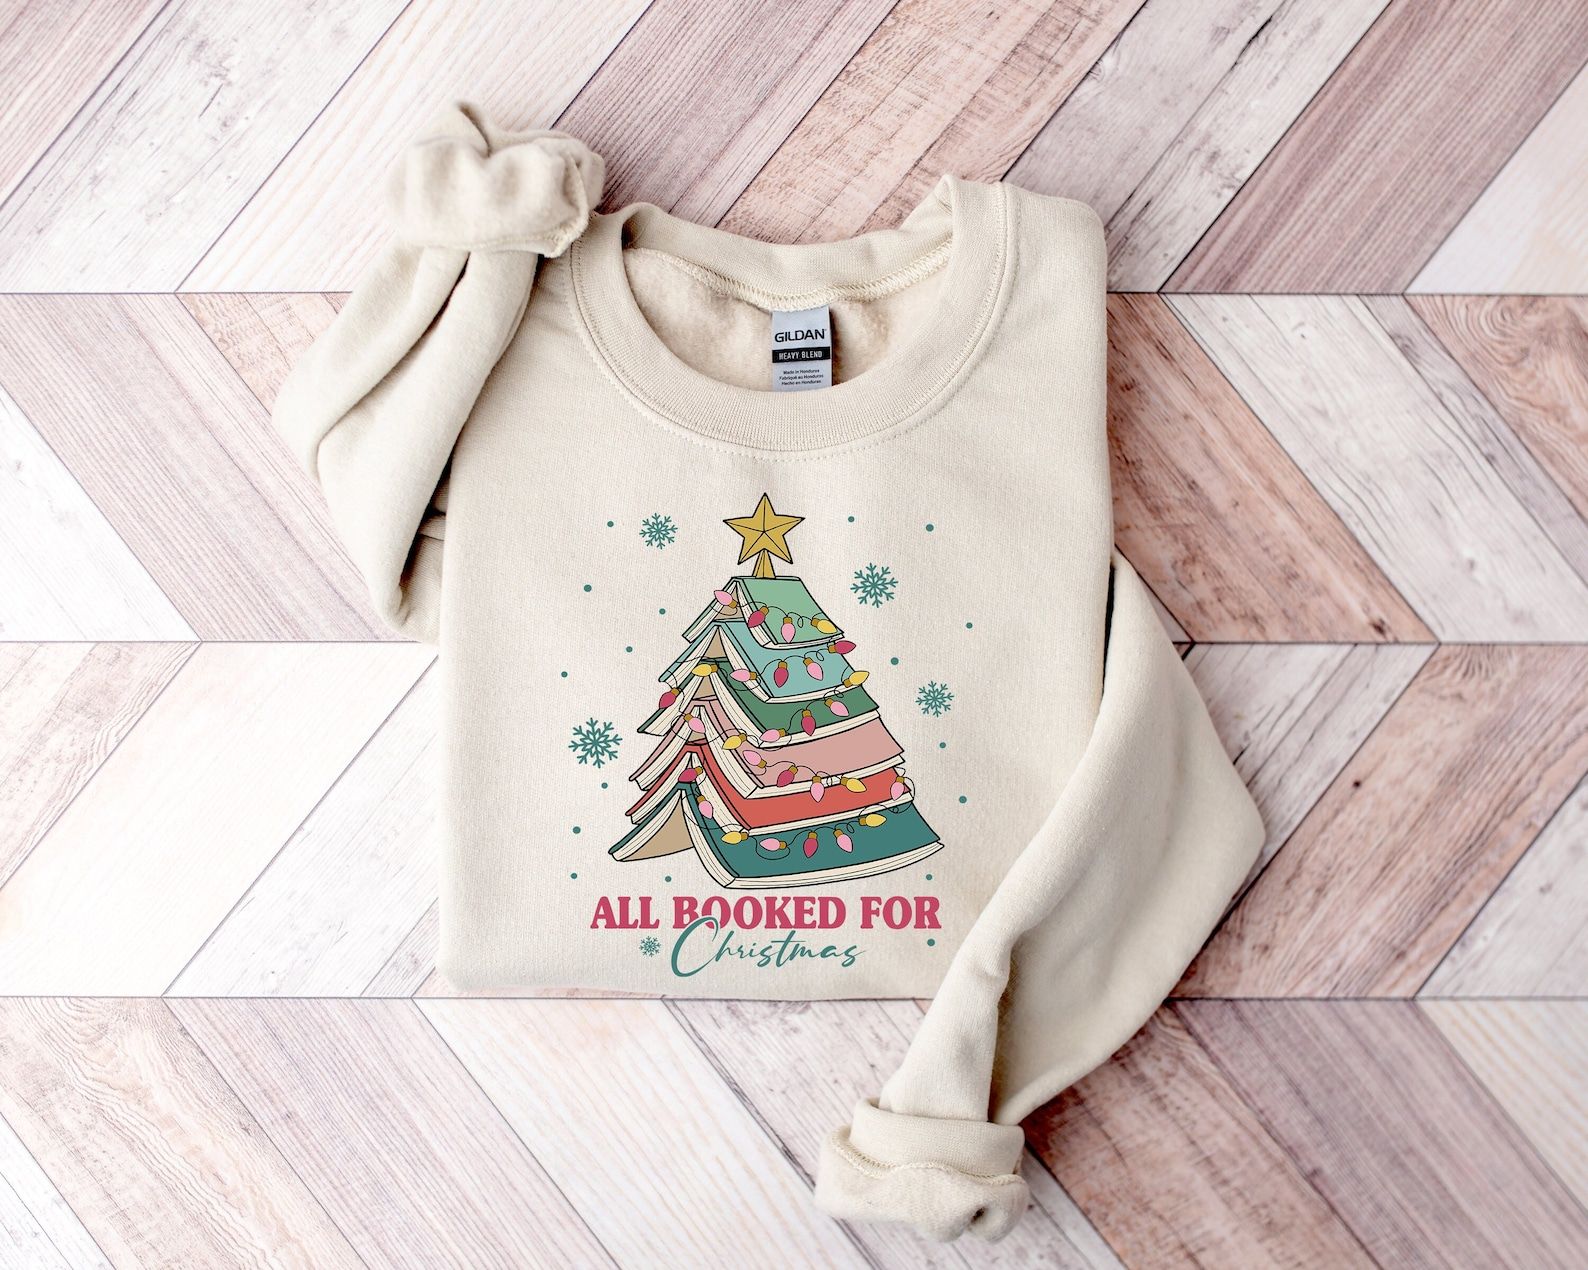 an off-white sweatshirt with a tree made out of books and the words "All booked for Christmas"